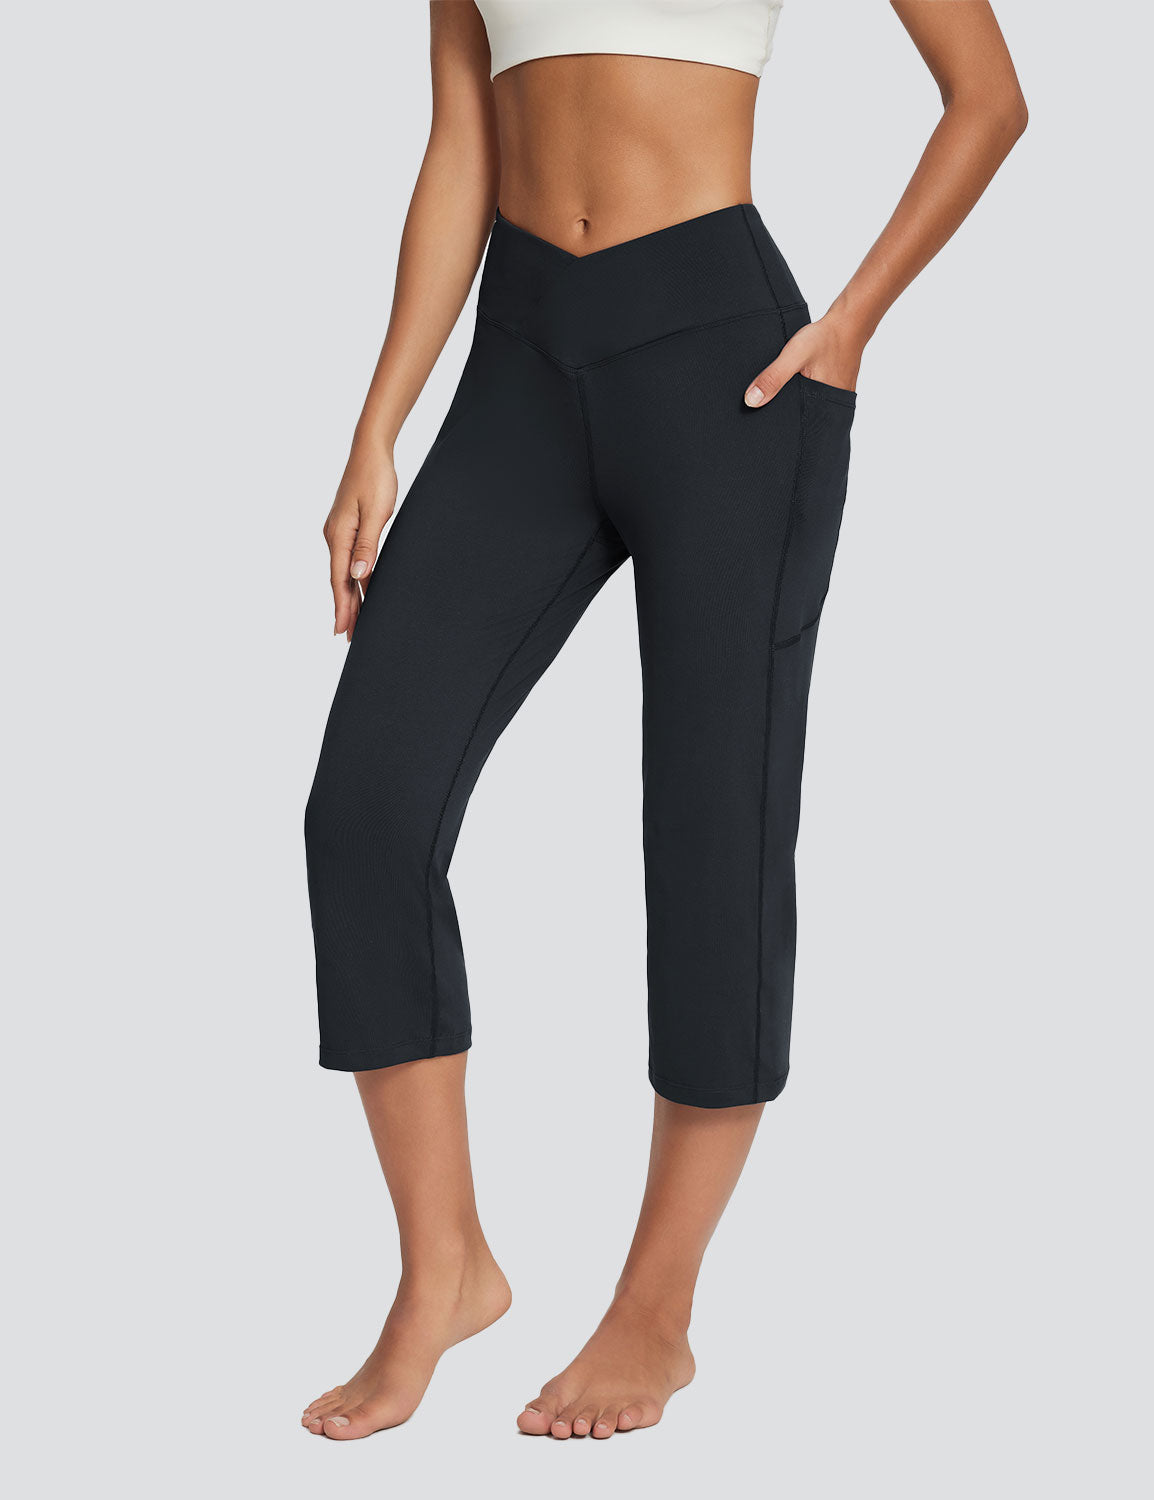 Baleaf Women's Skin-friendly Crossover High Rise Pants Anthracite Side